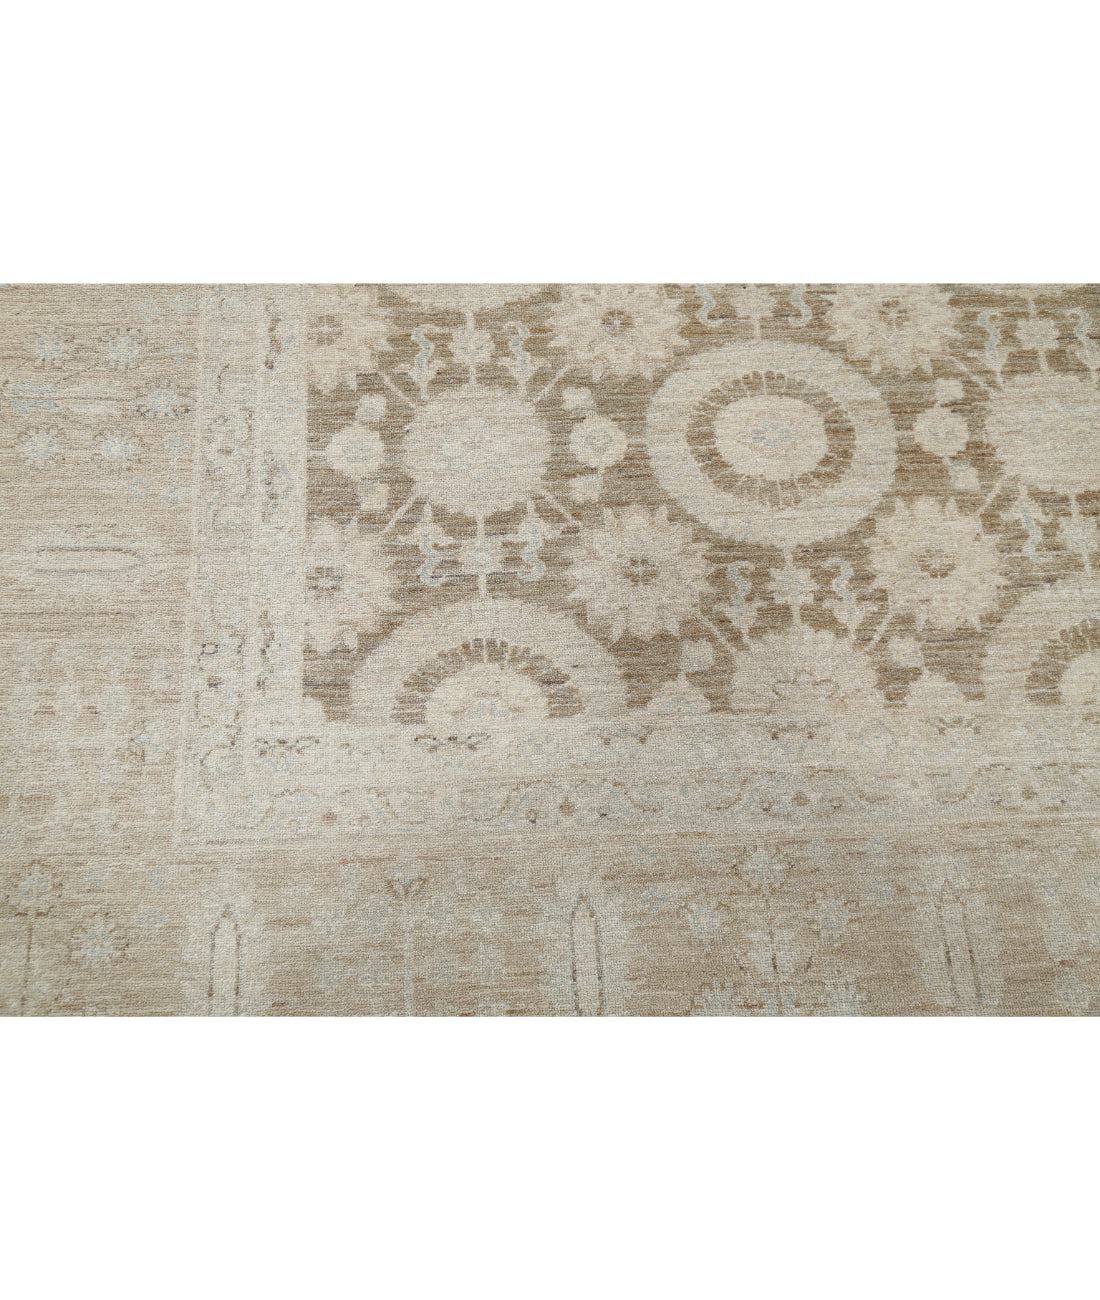 Hand Knotted Serenity Wool Rug - 7'8'' x 9'10'' 7'8'' x 9'10'' (230 X 295) / Taupe / Ivory